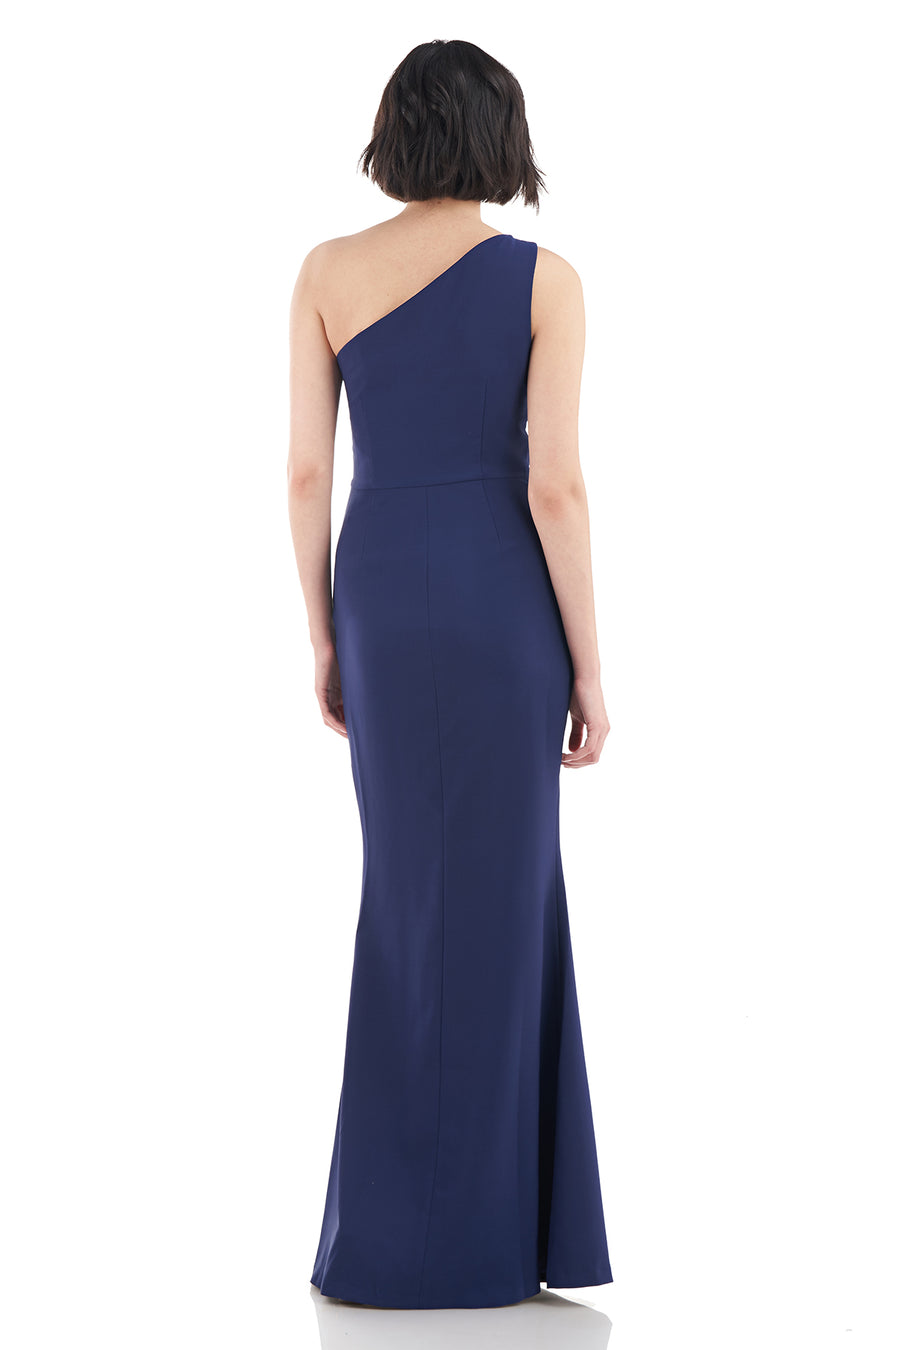 Lilah Bow Mermiad Gown